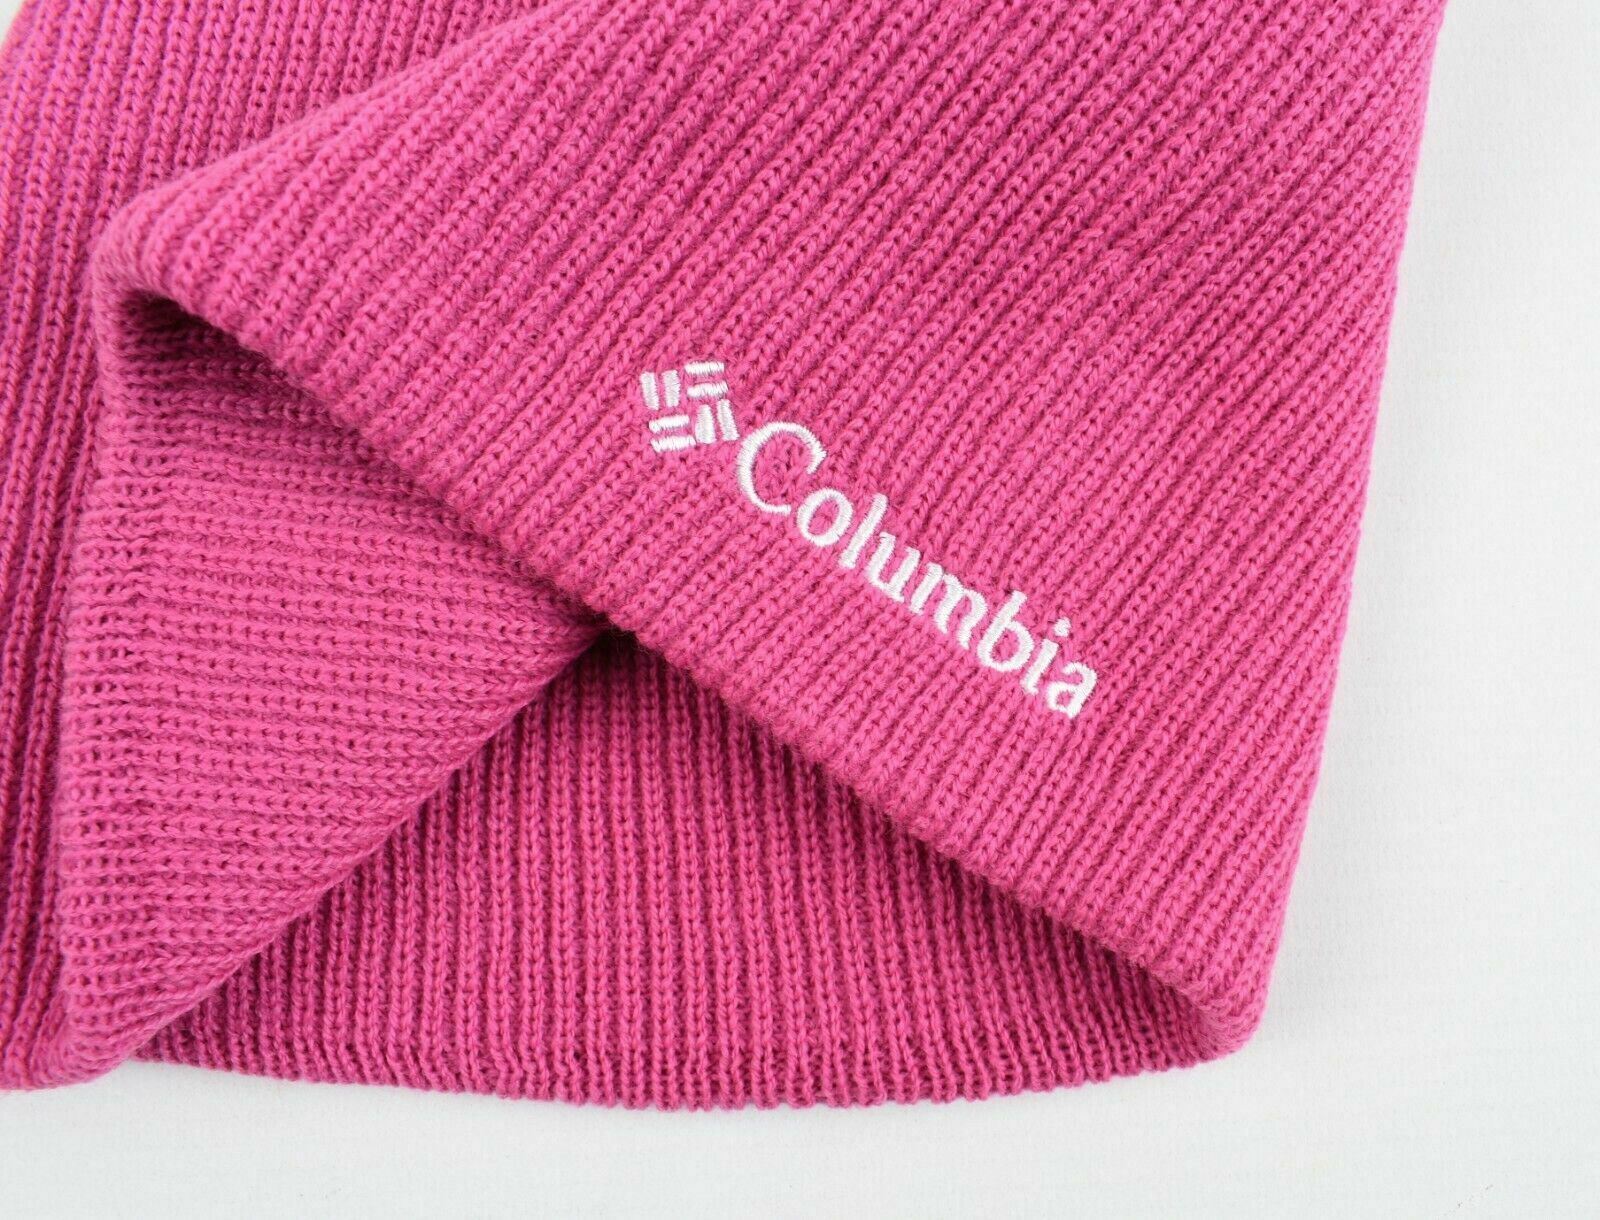 COLUMBIA Girls' Whirlibird Watch Rib Knit Beanie Hat, Pink, One Size Youth